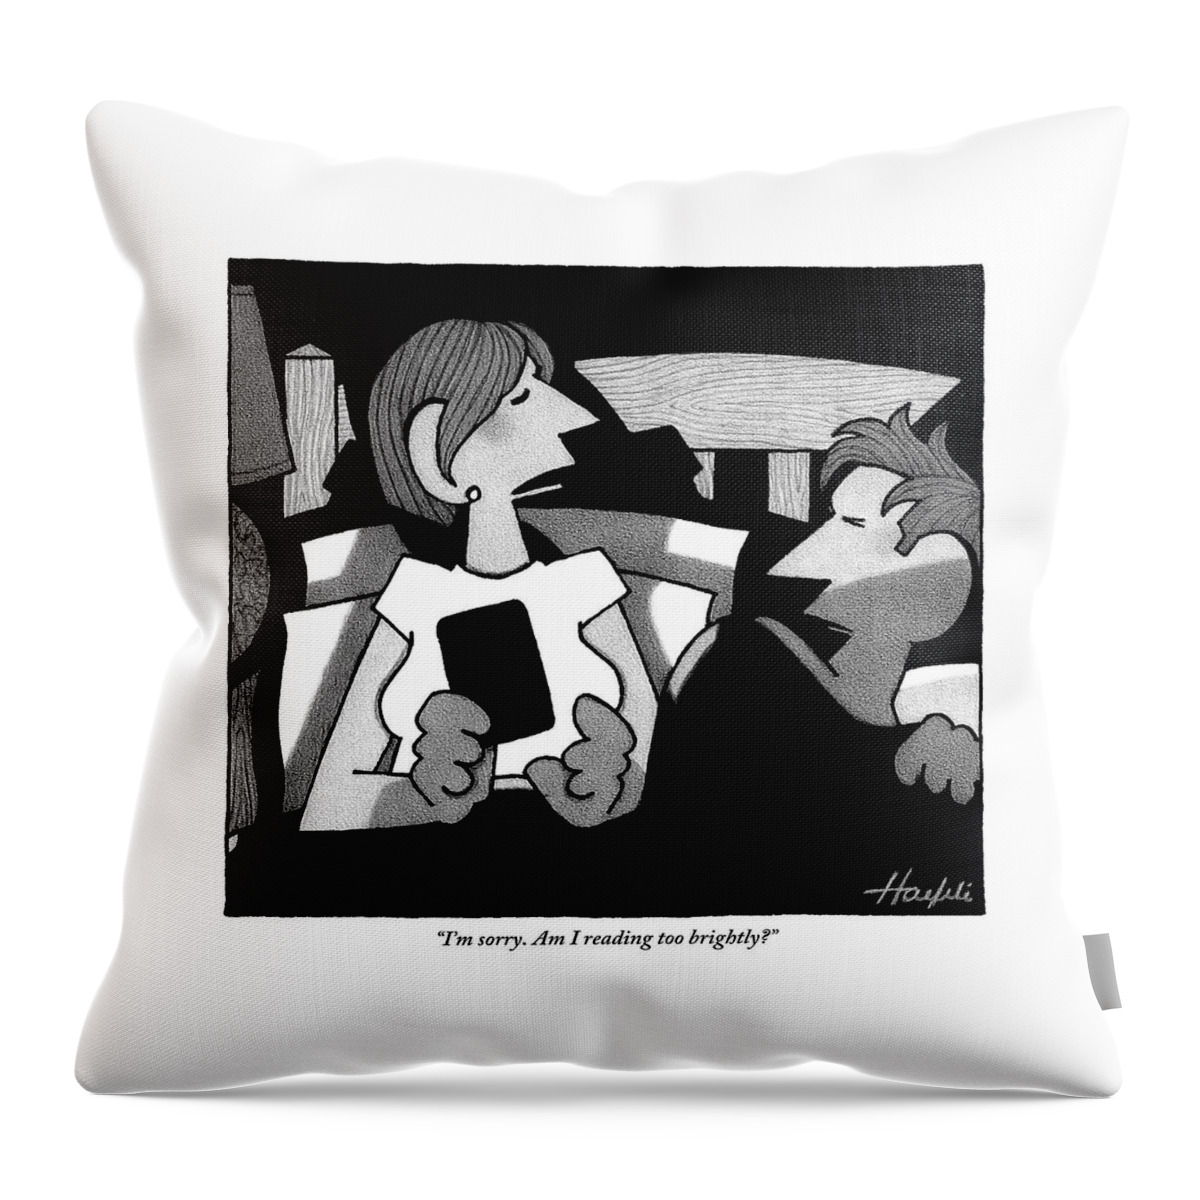 A Husband Is Awoken To His Wife's Late Night Throw Pillow